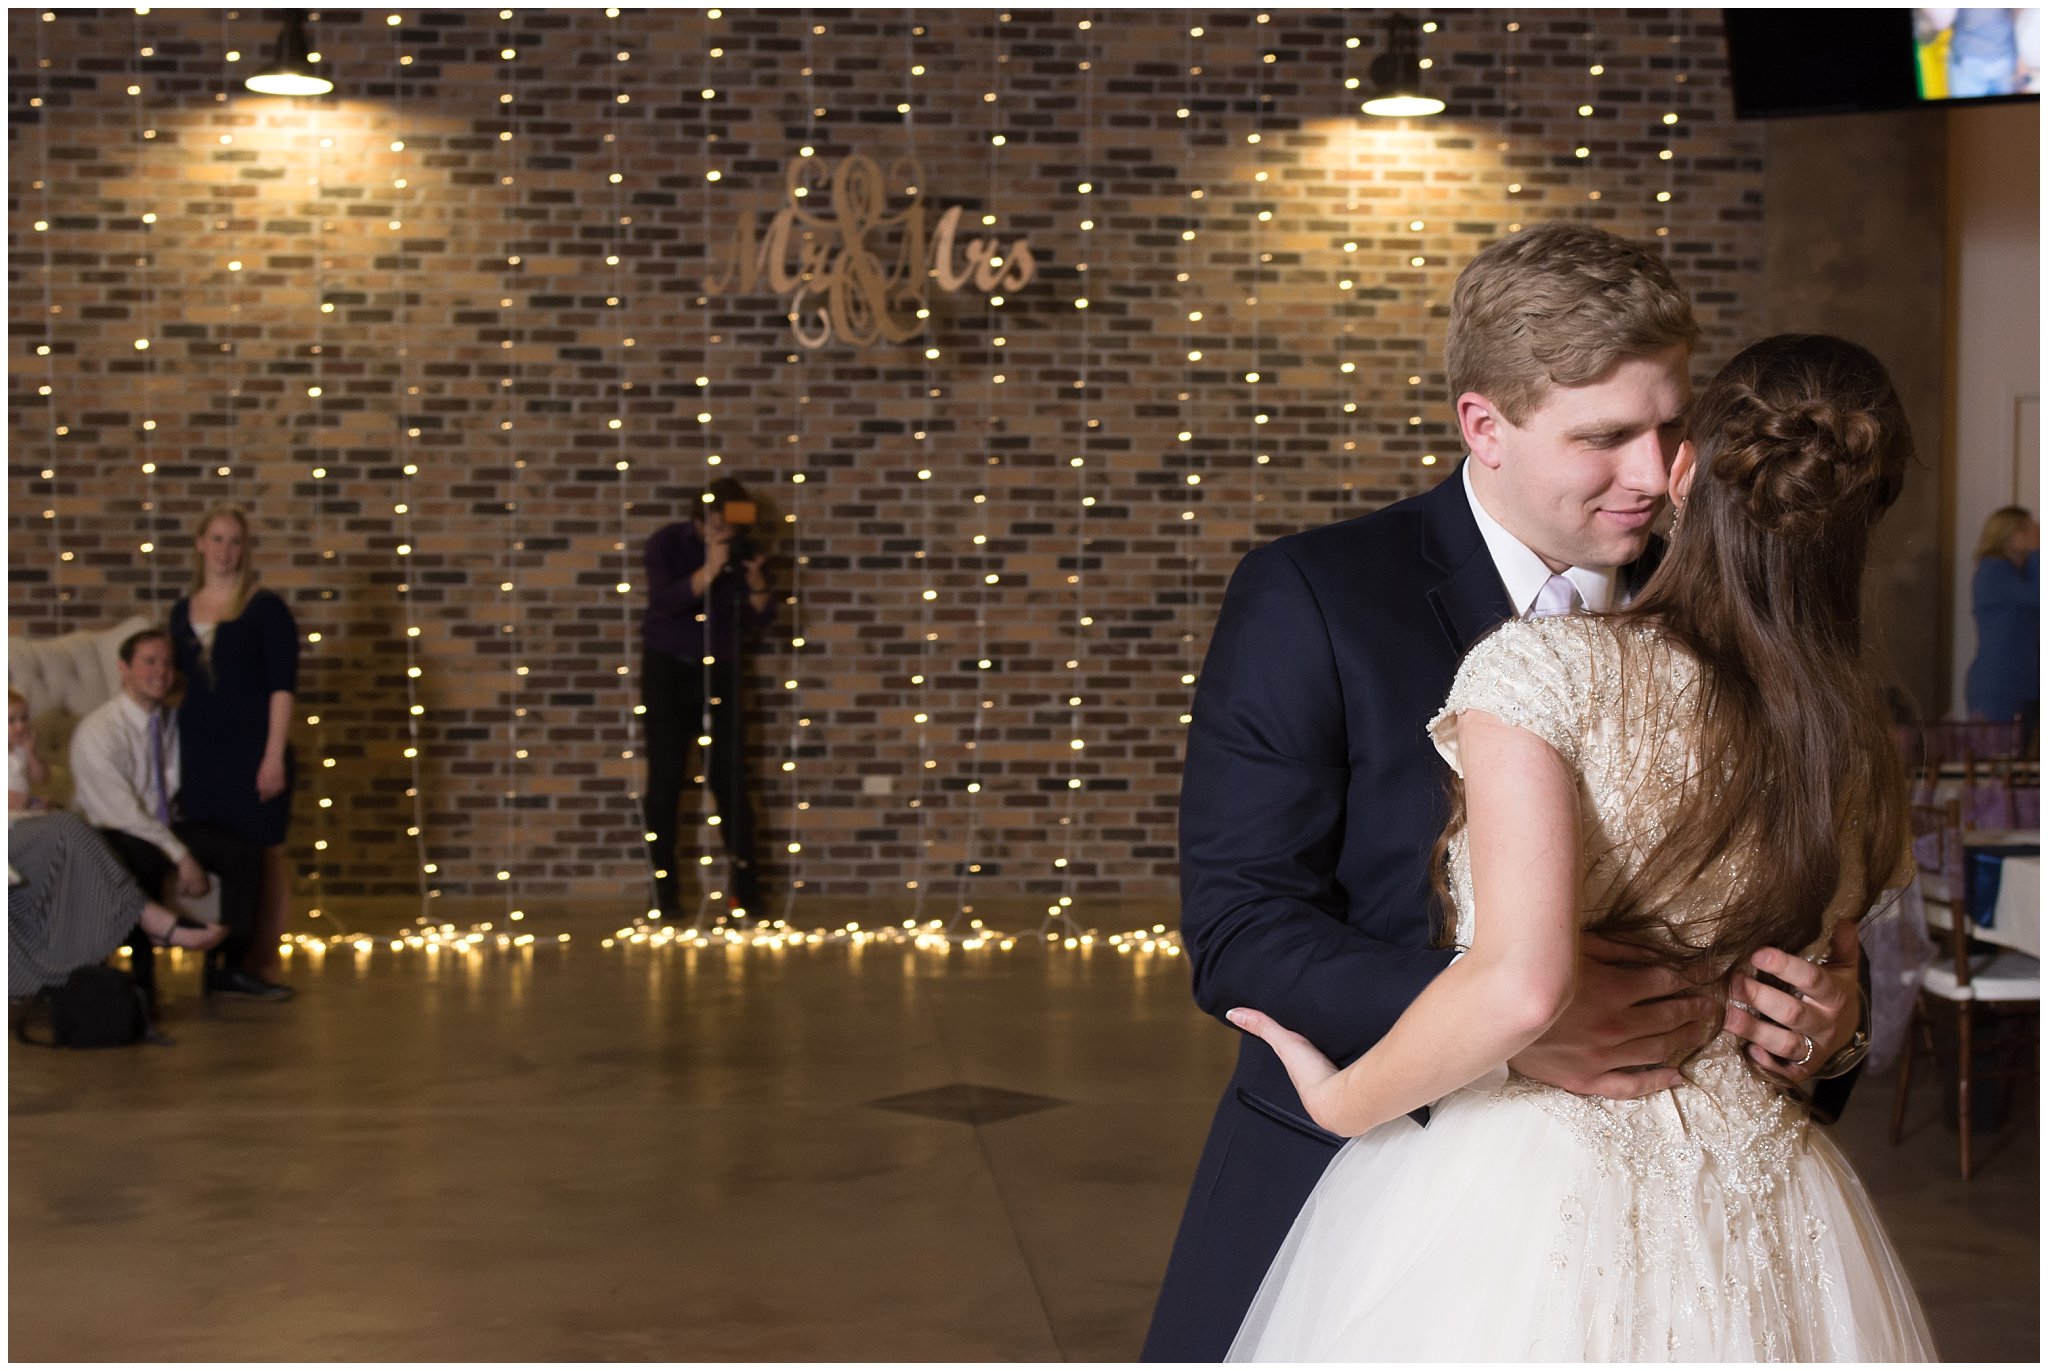 Reception dancing | wedding dancing and first dance | The Grand View | Jessie and Dallin Photography